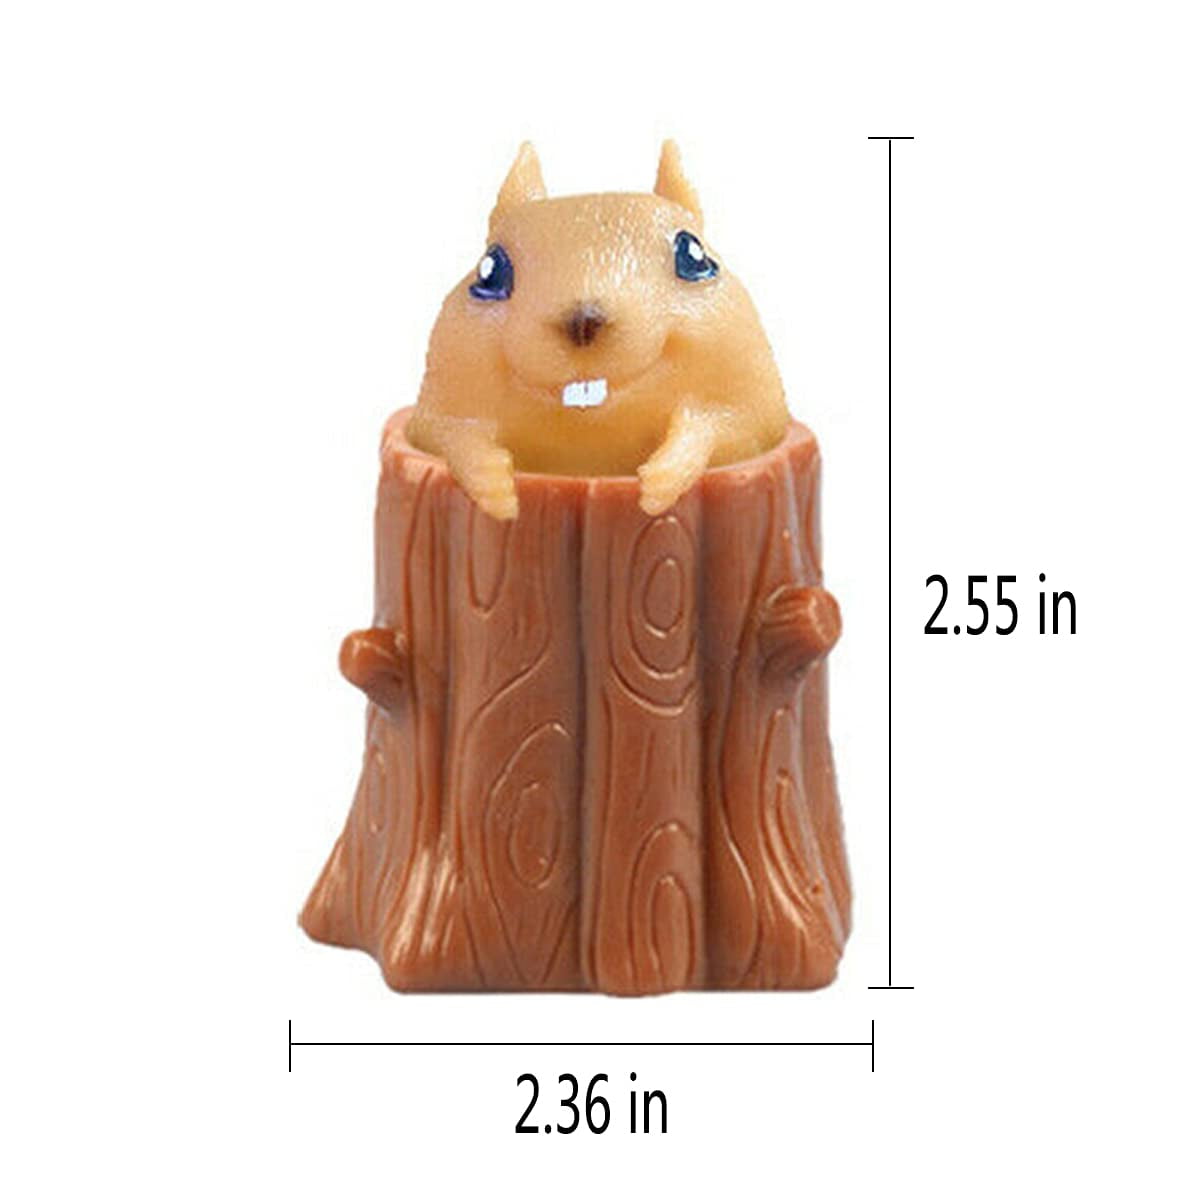 Funny Animal Fidget Toy Sensory Stress Relief Autism Special Need Squirrel Gifts 